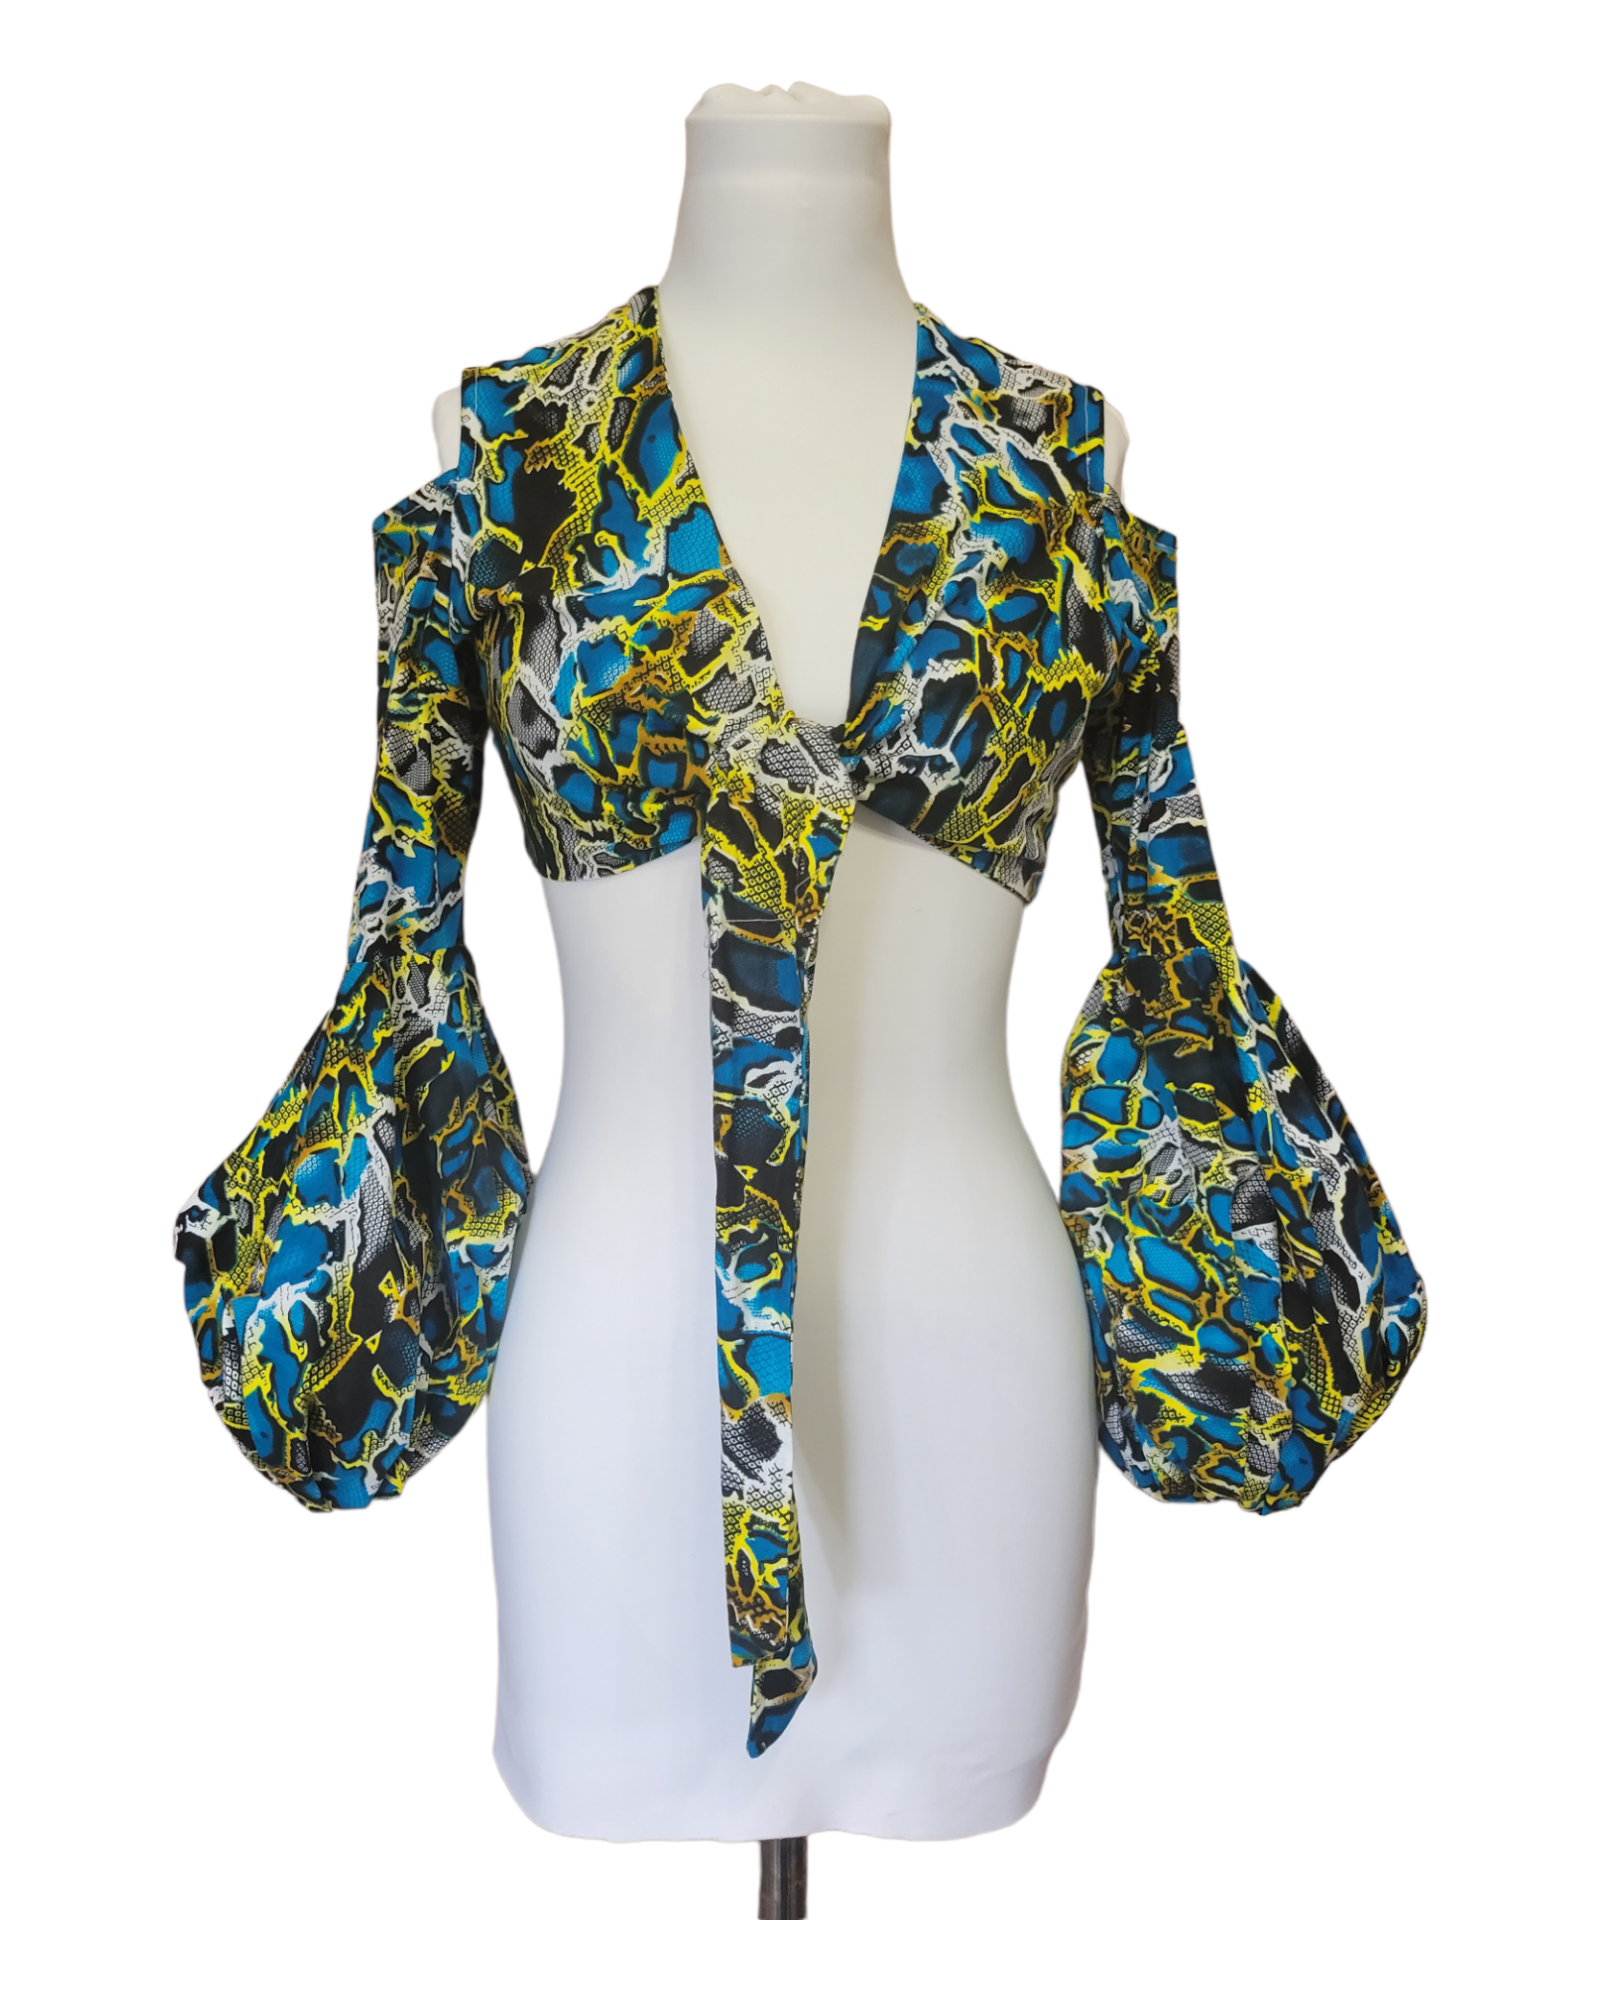 The V-Neck Printed Crop Jacket With Puff Sleeves